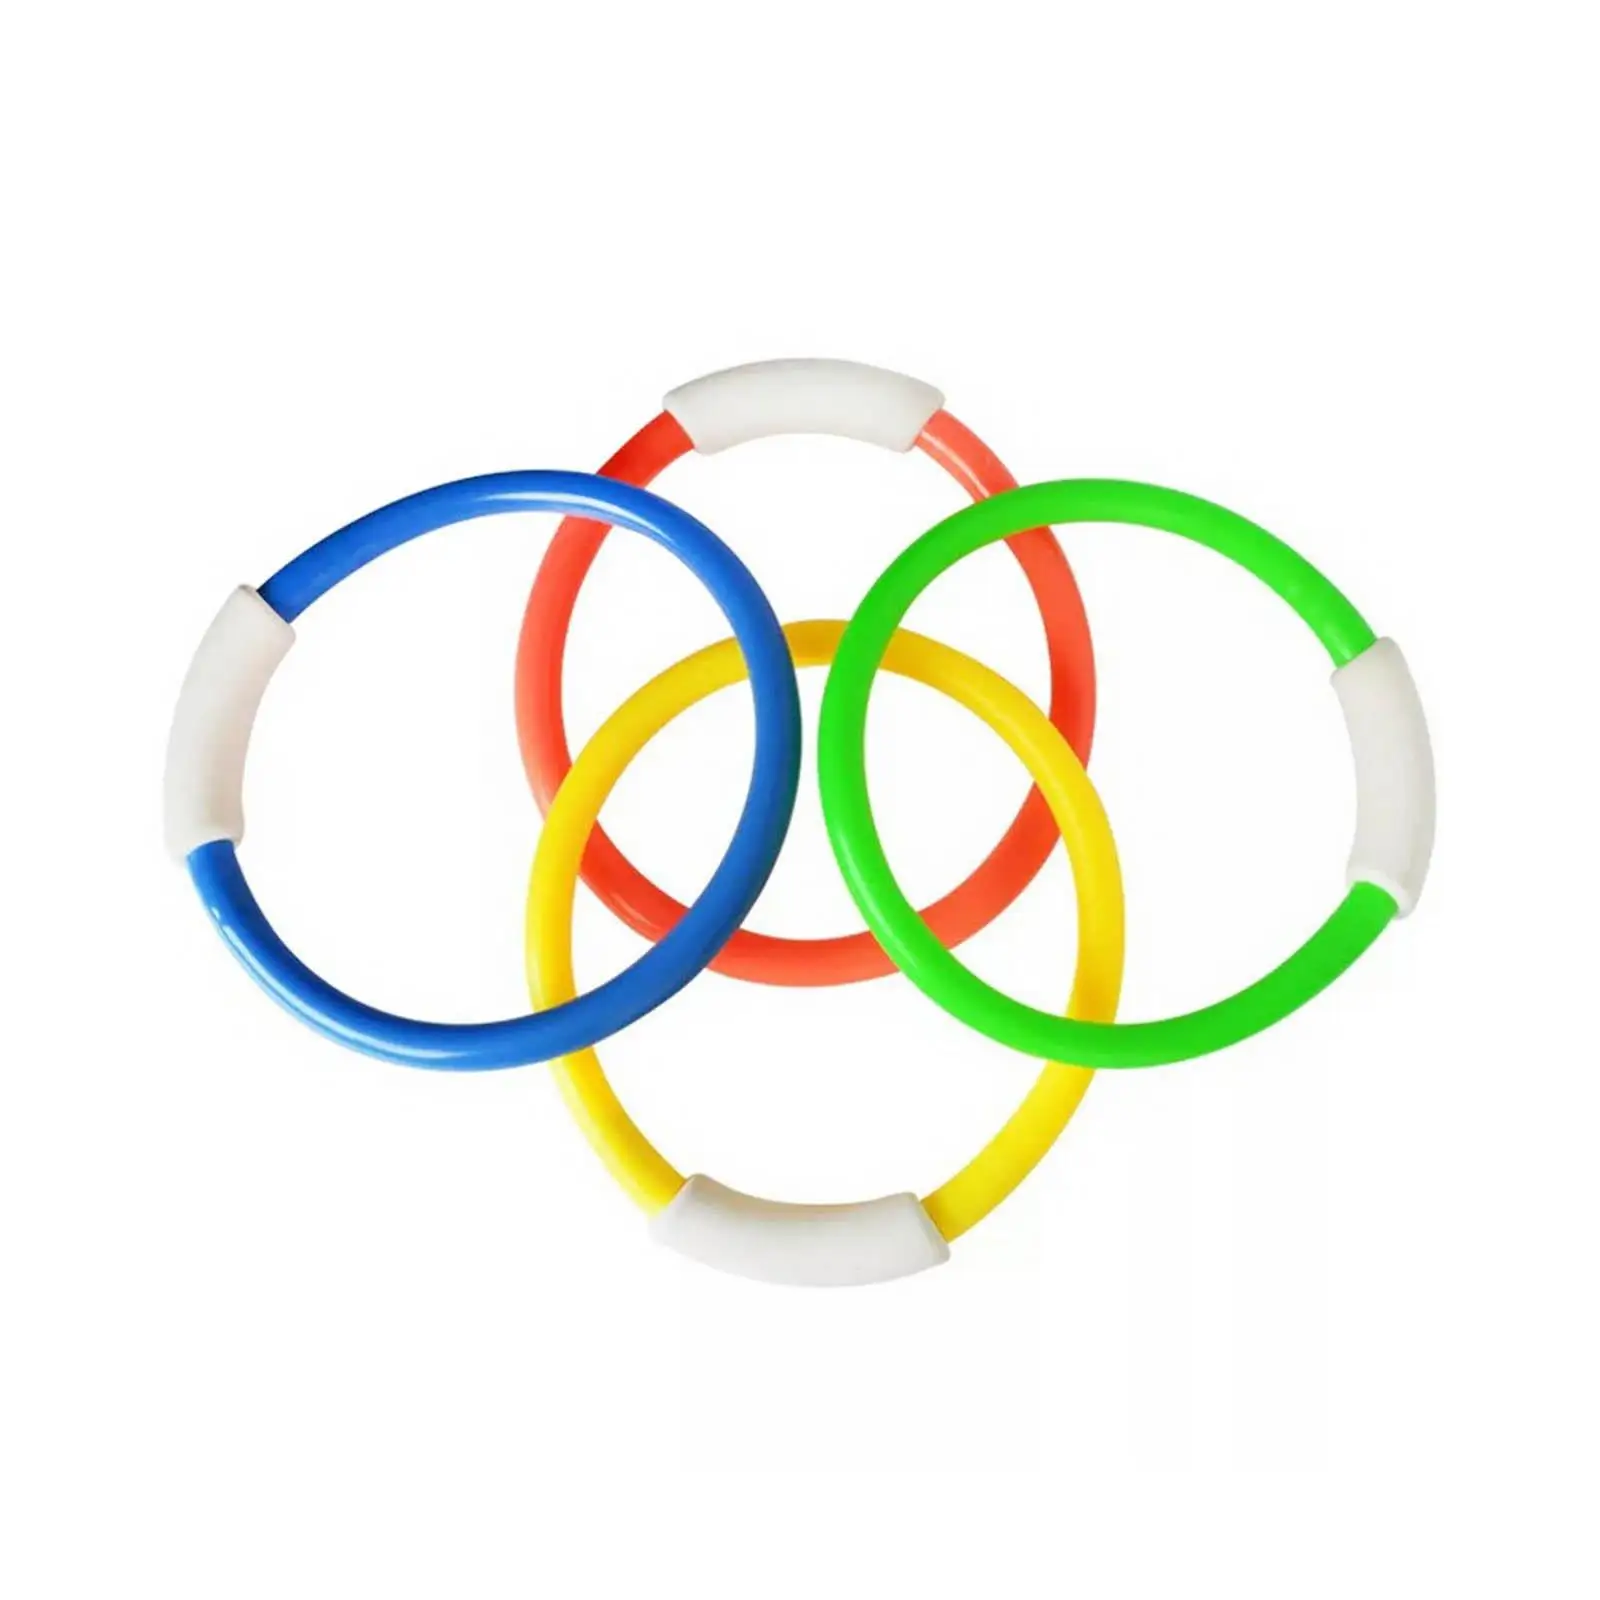 4x Diving Rings for Pool Multi Toy Water Toys for Kids Underwater Dive Rings for Playing Diving Swimming Beach Summer